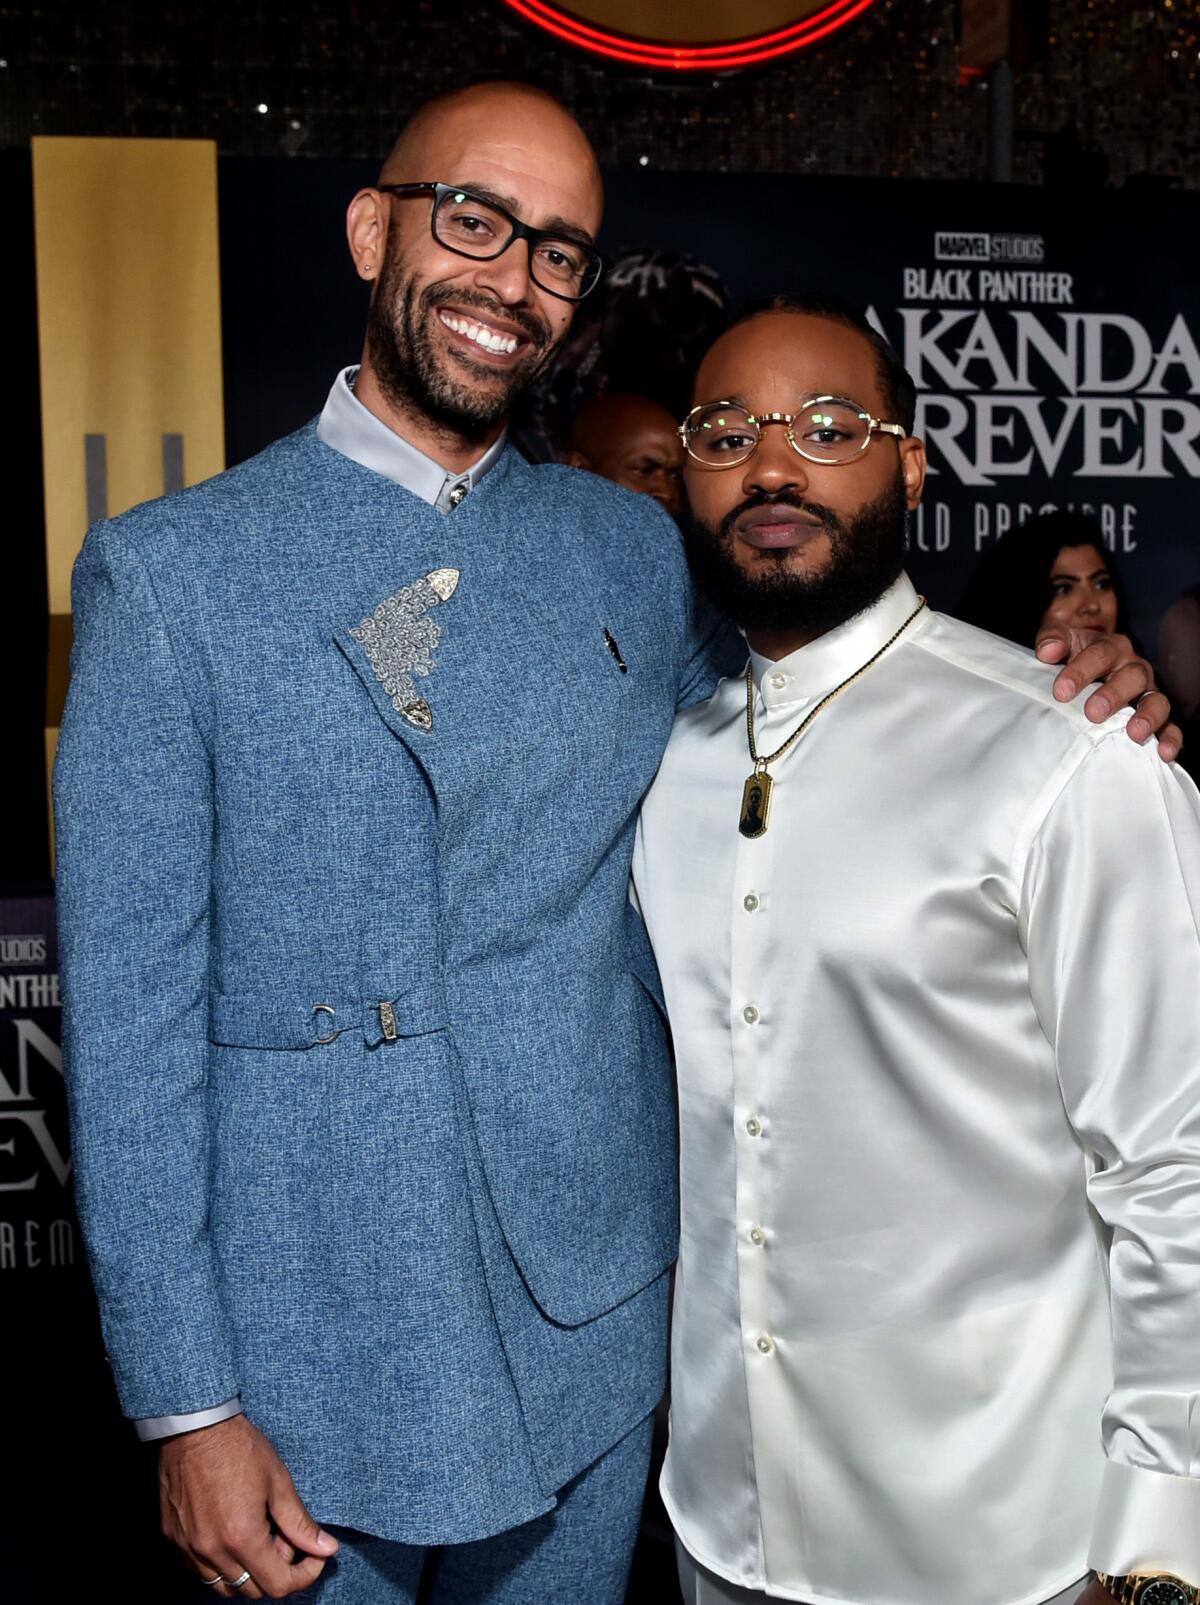 Two men pose for a photo at the world premiere of "Black Panther: Wakanda Forever."